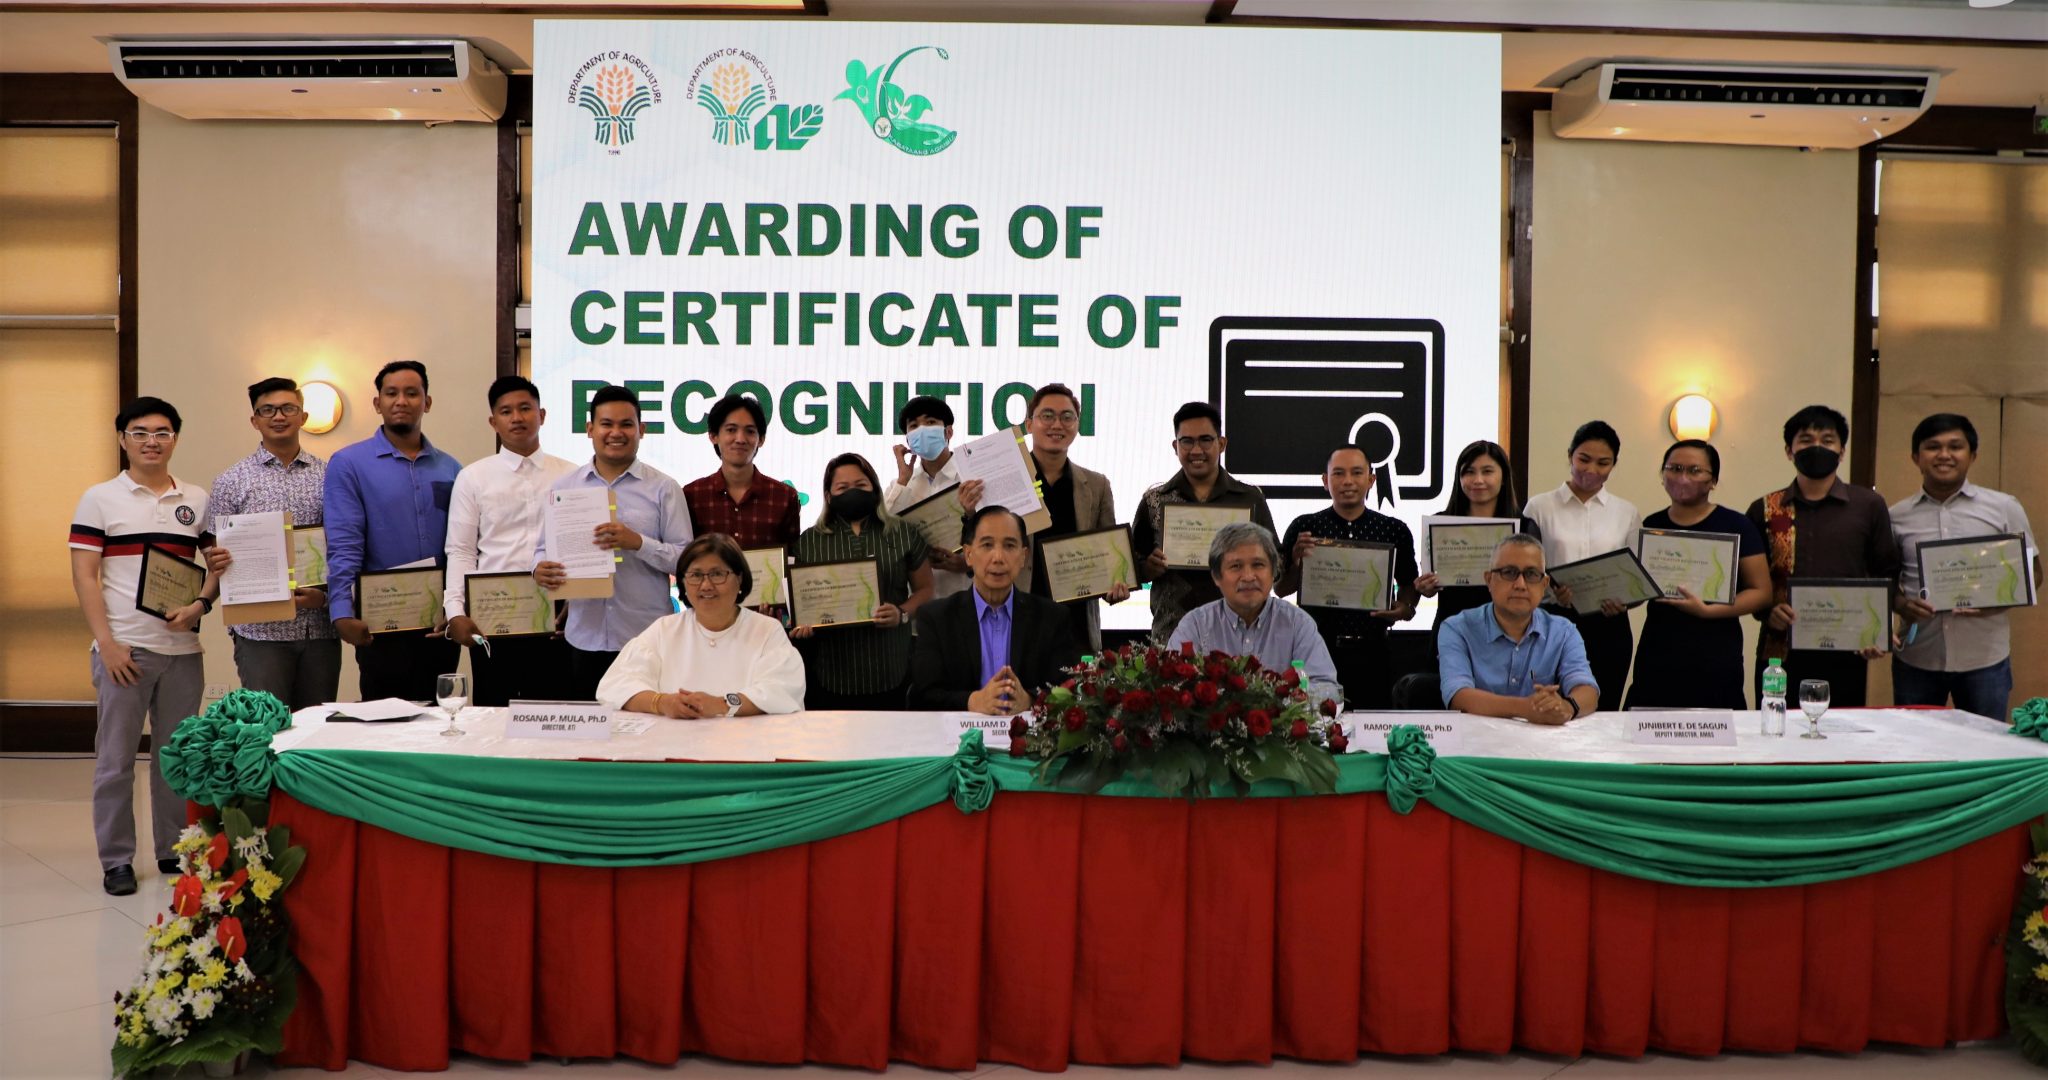 DA appoints YFCI as “Ambassadors of Agriculture”